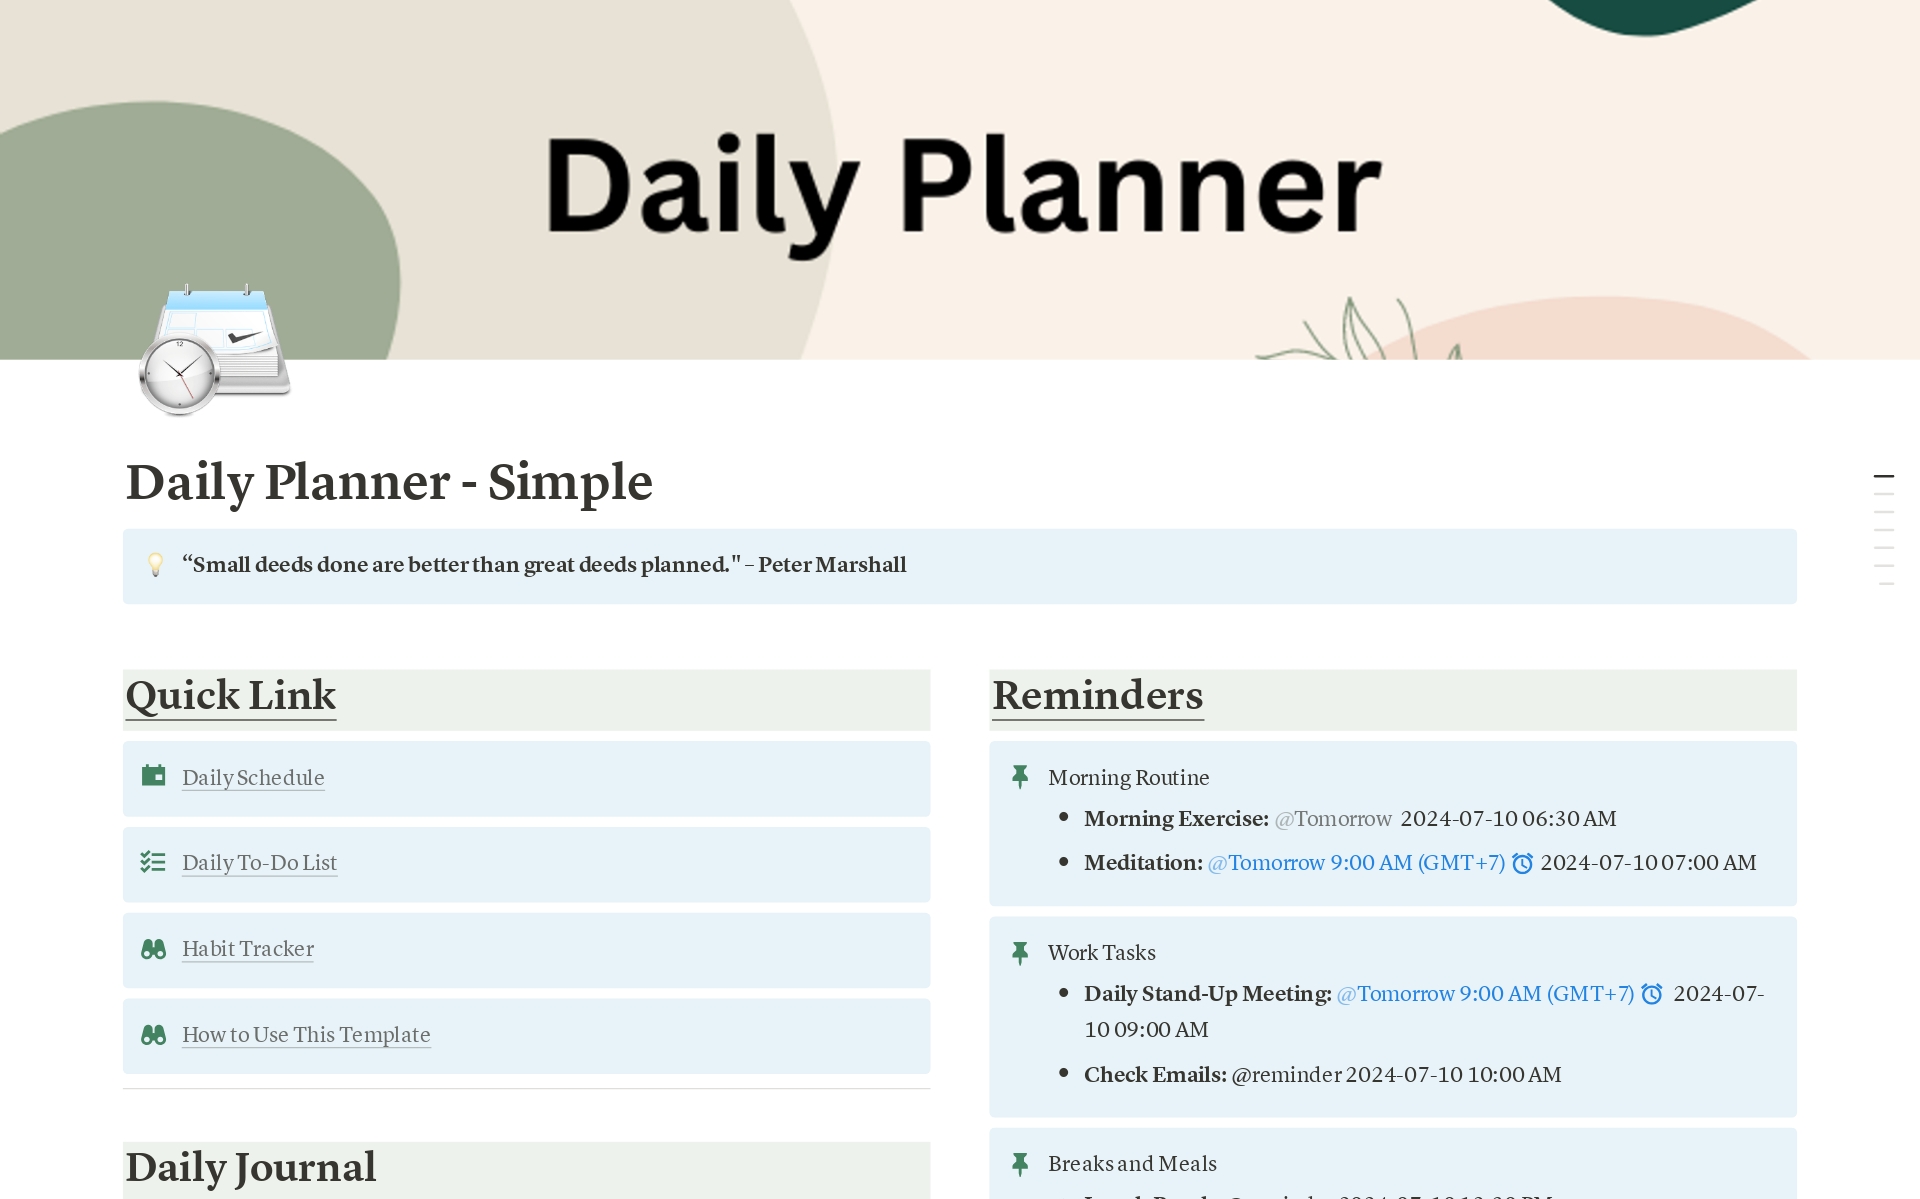 Organize your day with this all-in-one Daily Planner. Track your tasks, schedule your activities, monitor your habits, and reflect on your progress effortlessly.

